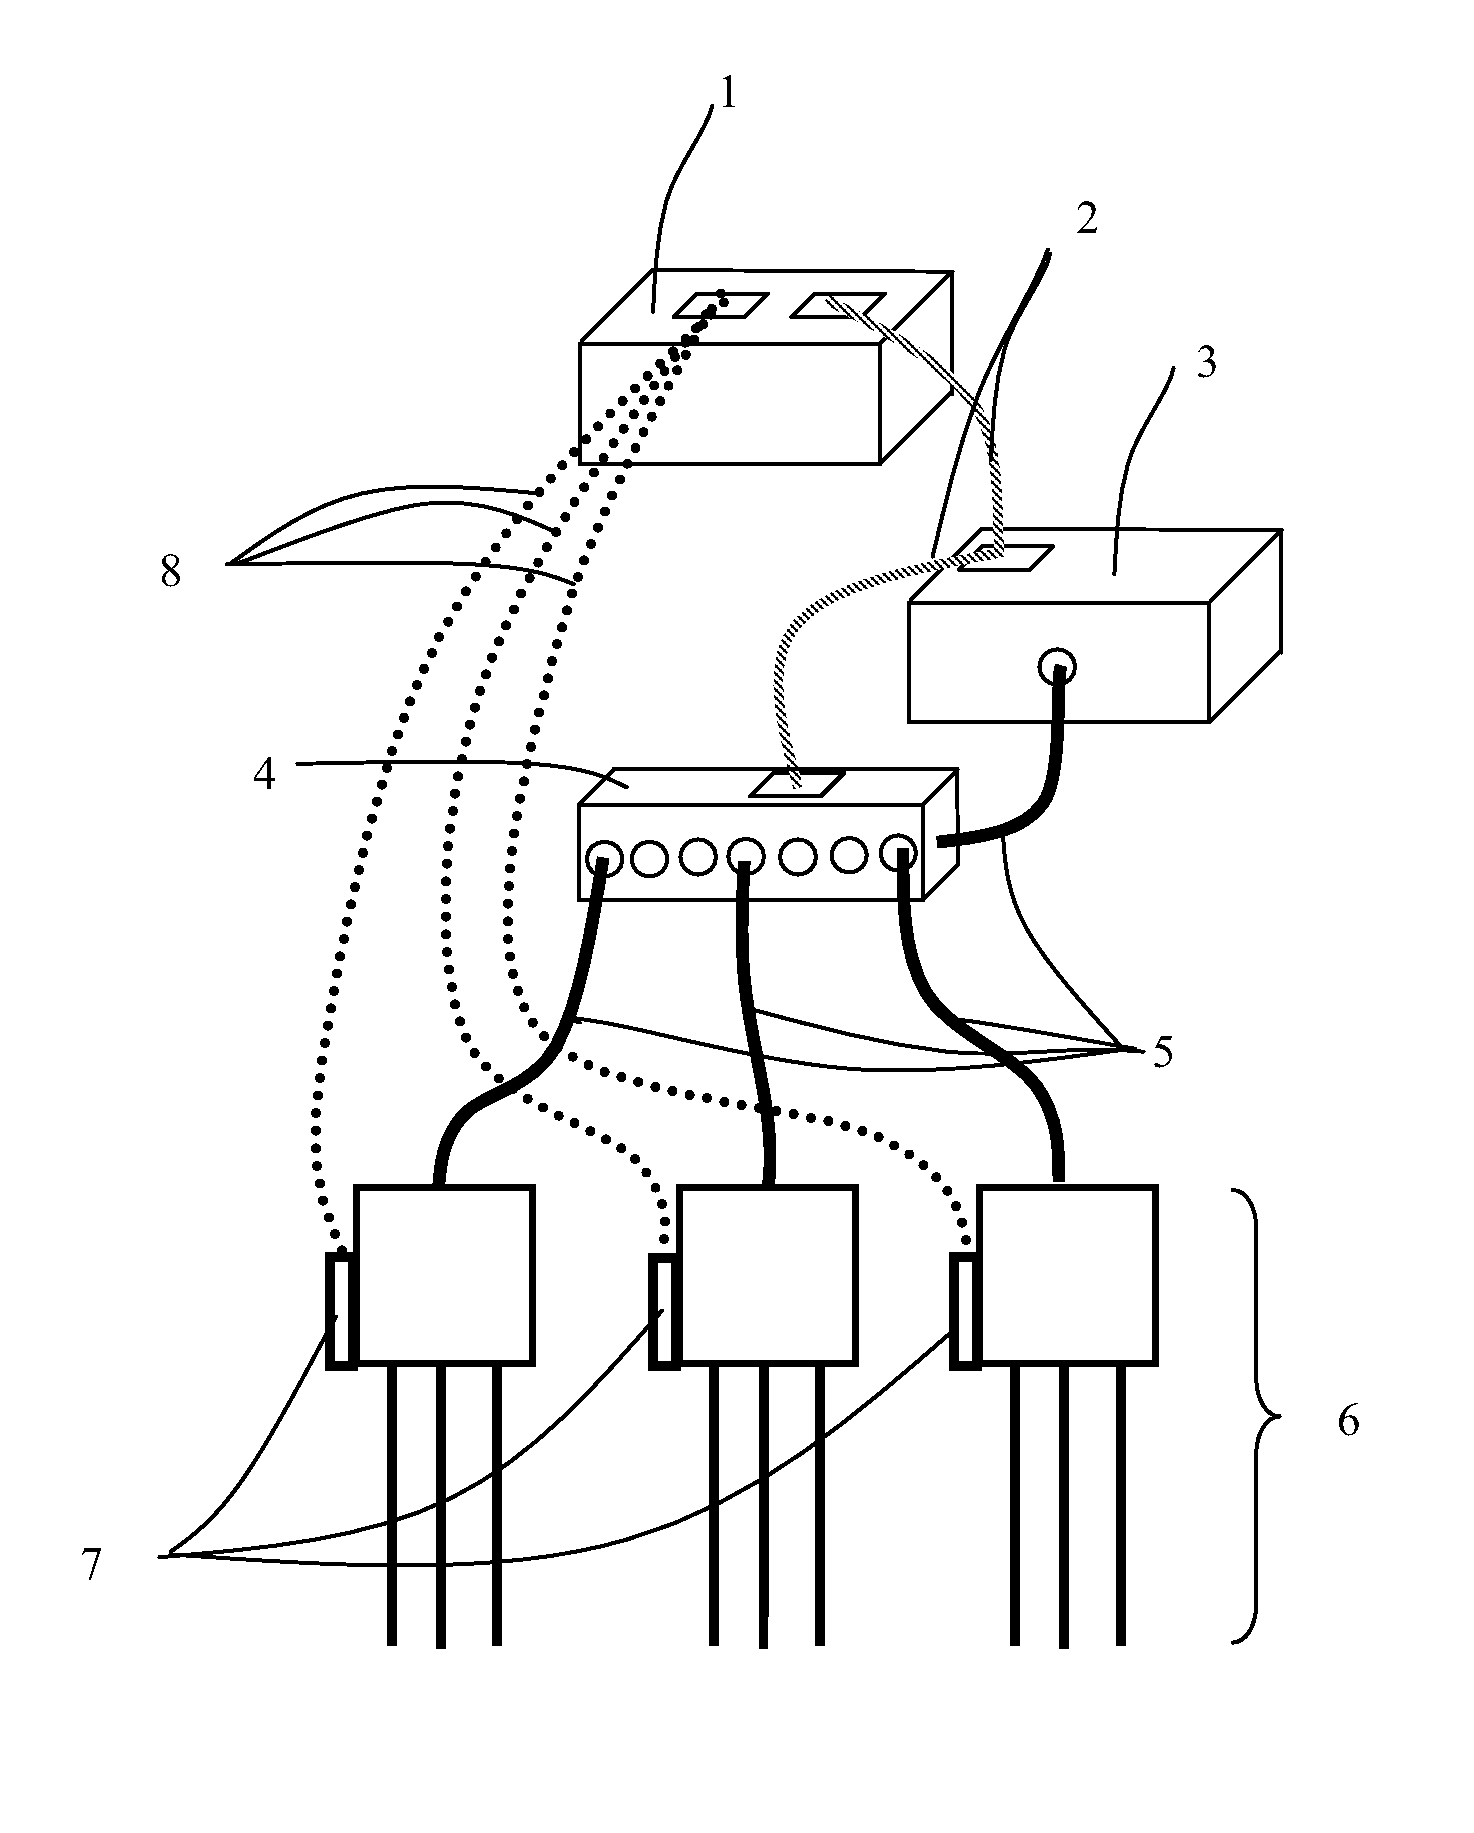 Modified tdr method and apparatus for suspended solid concentration measurement